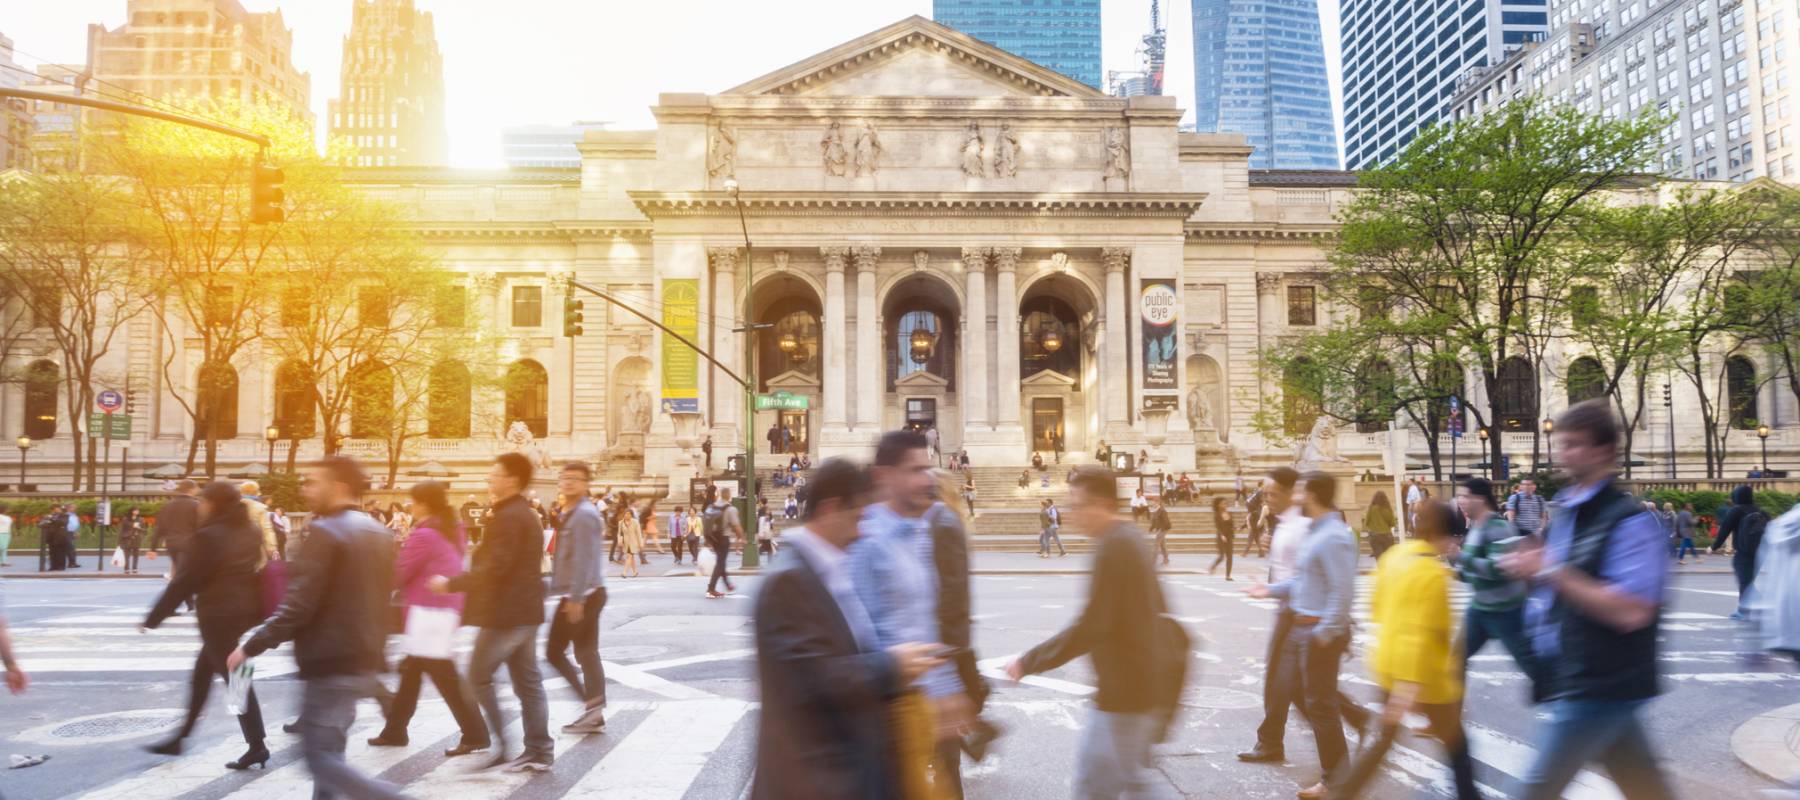 People on pedestrian crossing in front of New York Public Library, New York City, New York, USA - stock photo